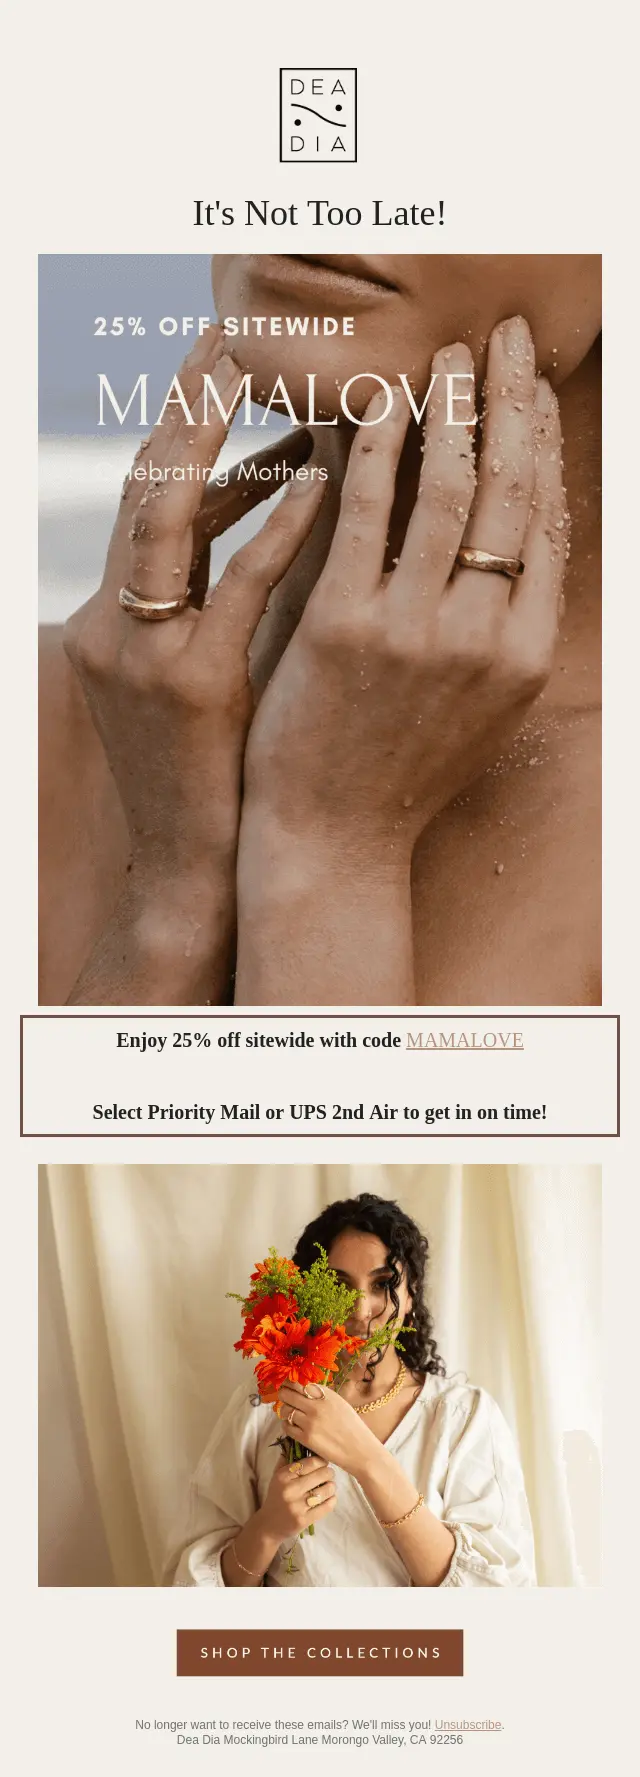  Image shows a mother’s day email campaign from DeaDia